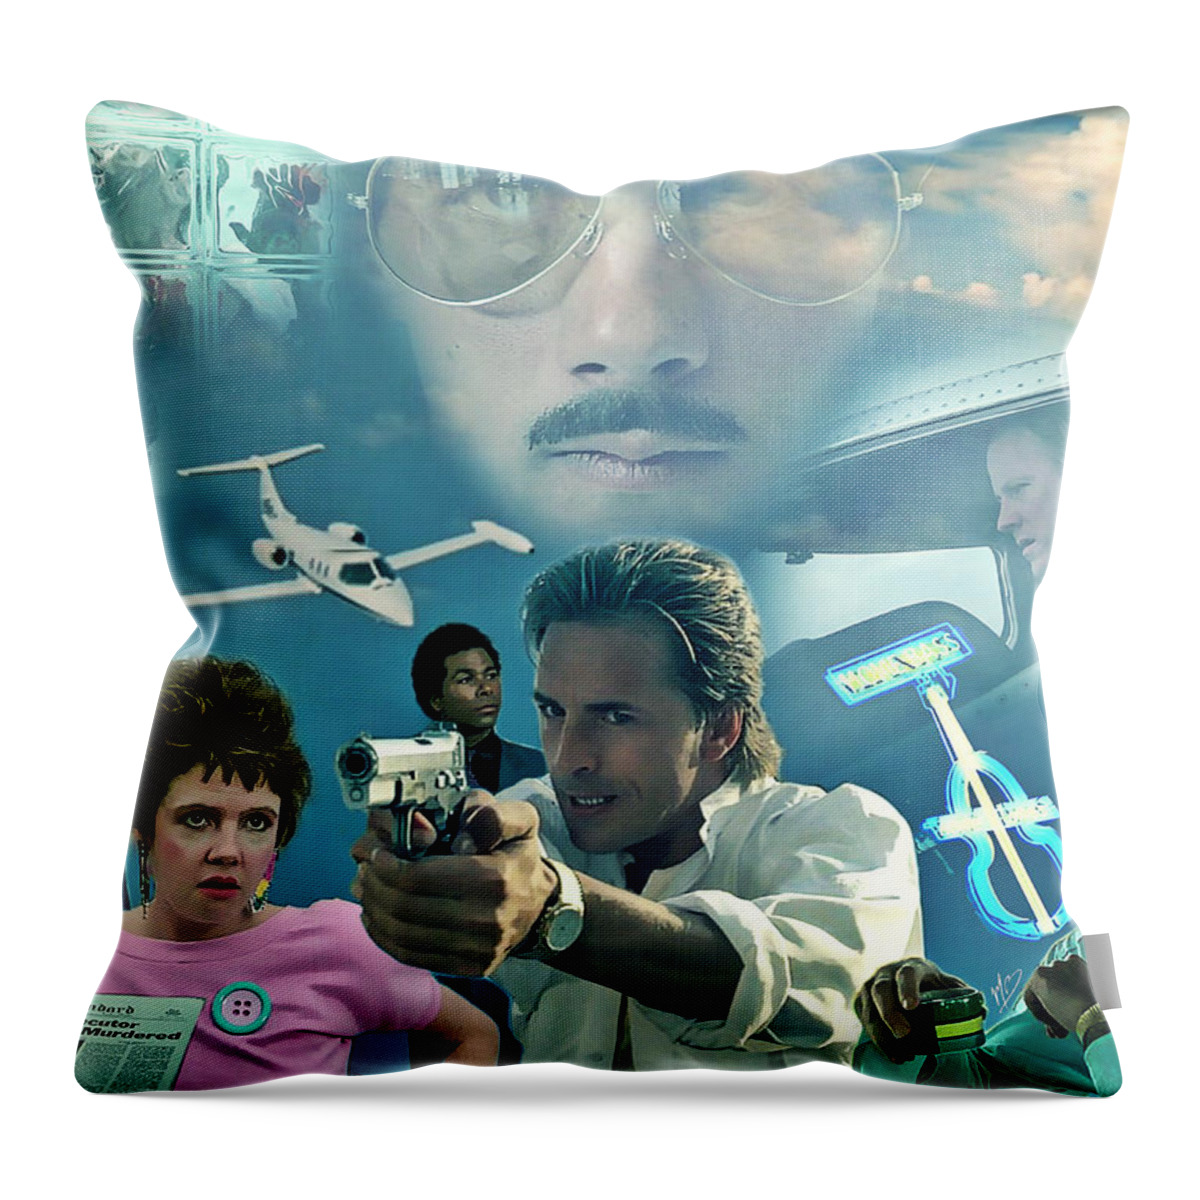 Miami Vice Throw Pillow featuring the digital art One Way Ticket by Mark Baranowski